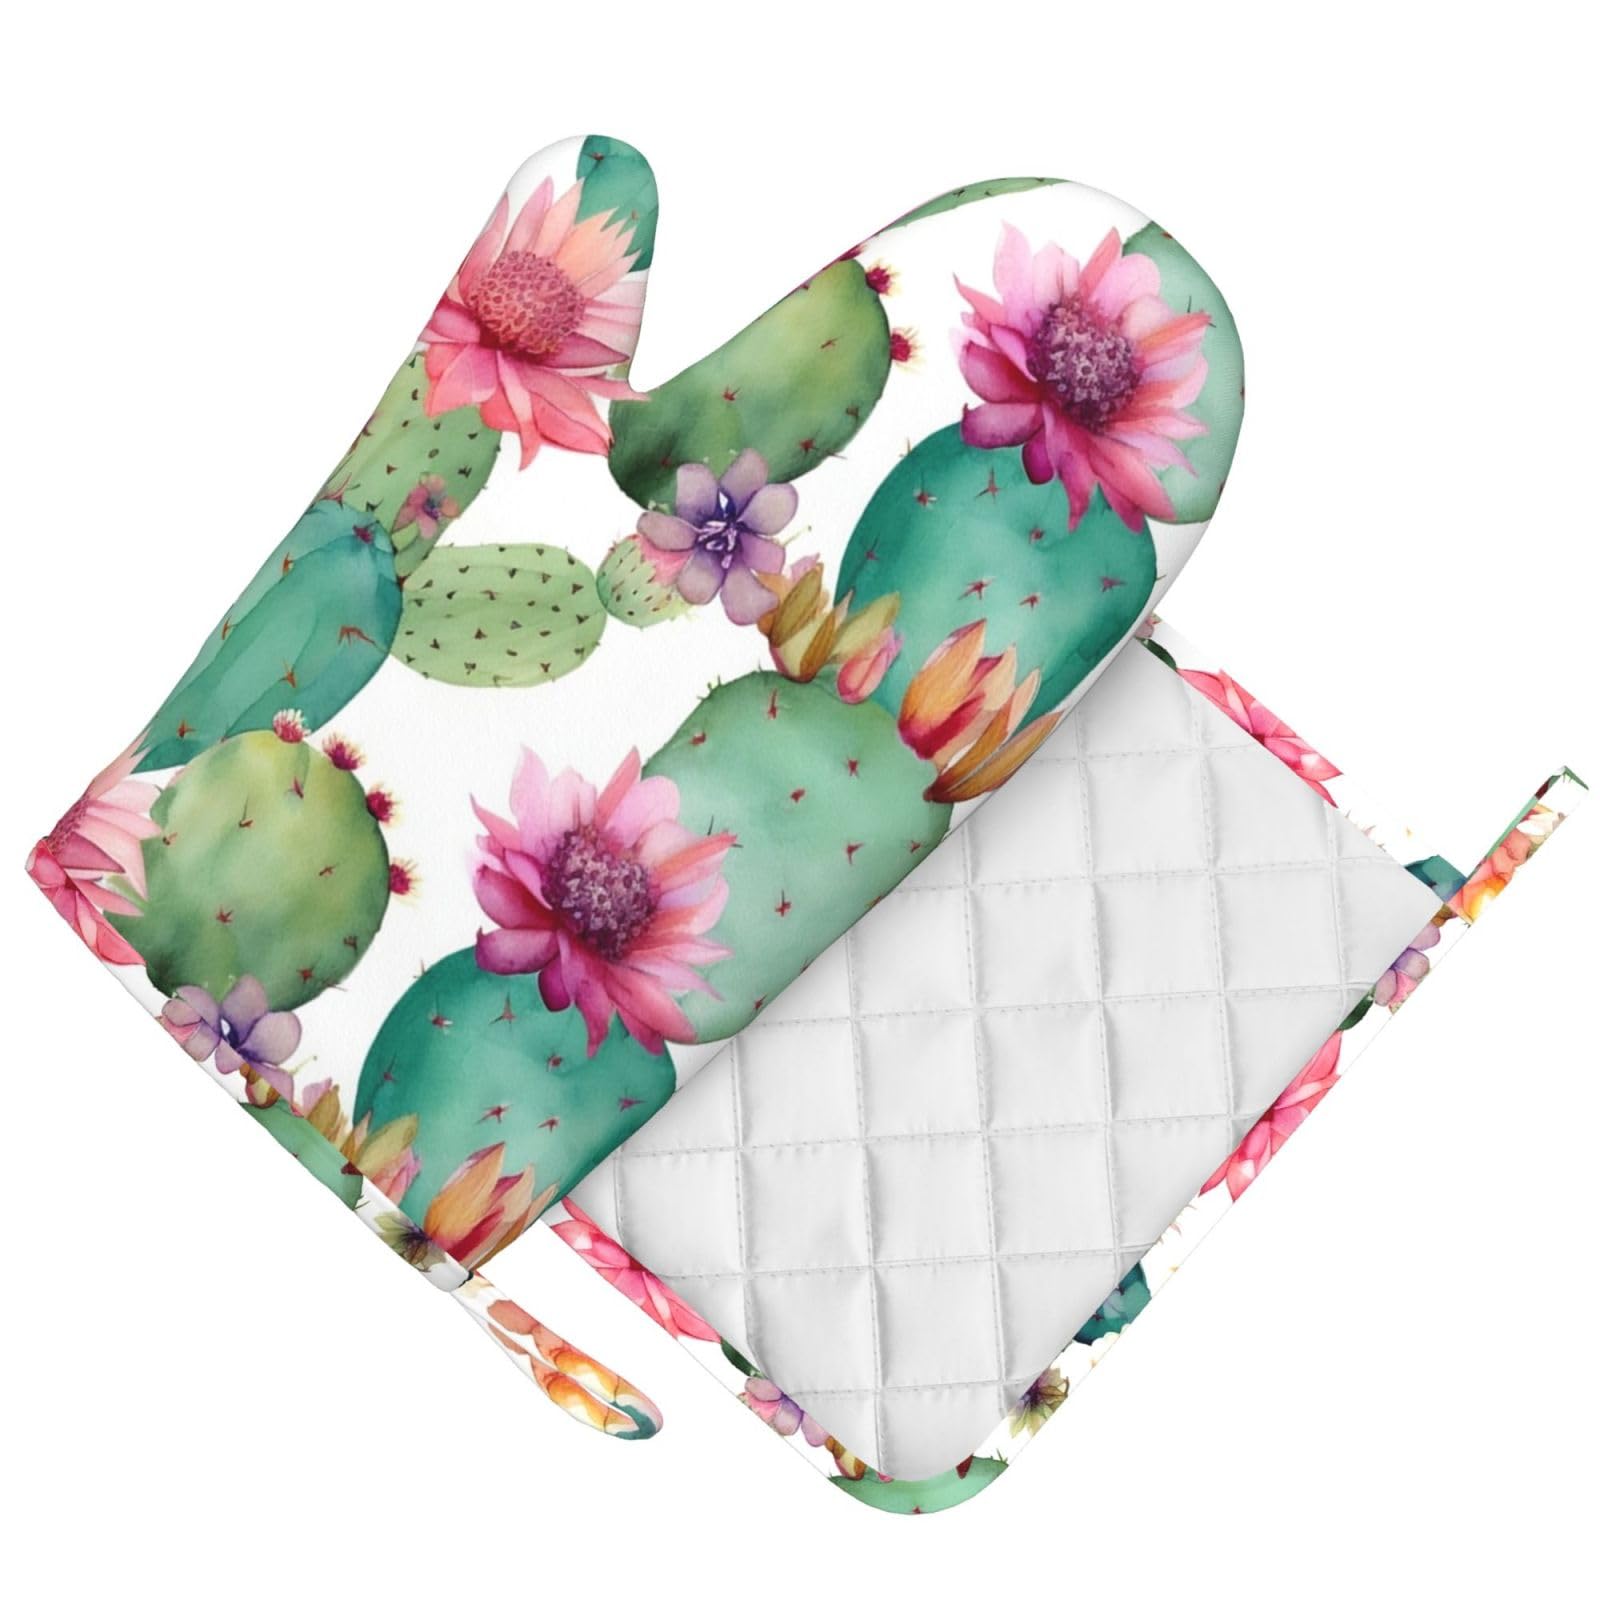 Cactus Flower Printed Oven Mitts and Pot Holders Sets Heat Resistant Kitchen Oven Gloves Potholders Set Extra Long Non-Slip Silicone Gloves for Cooking Baking BBQ